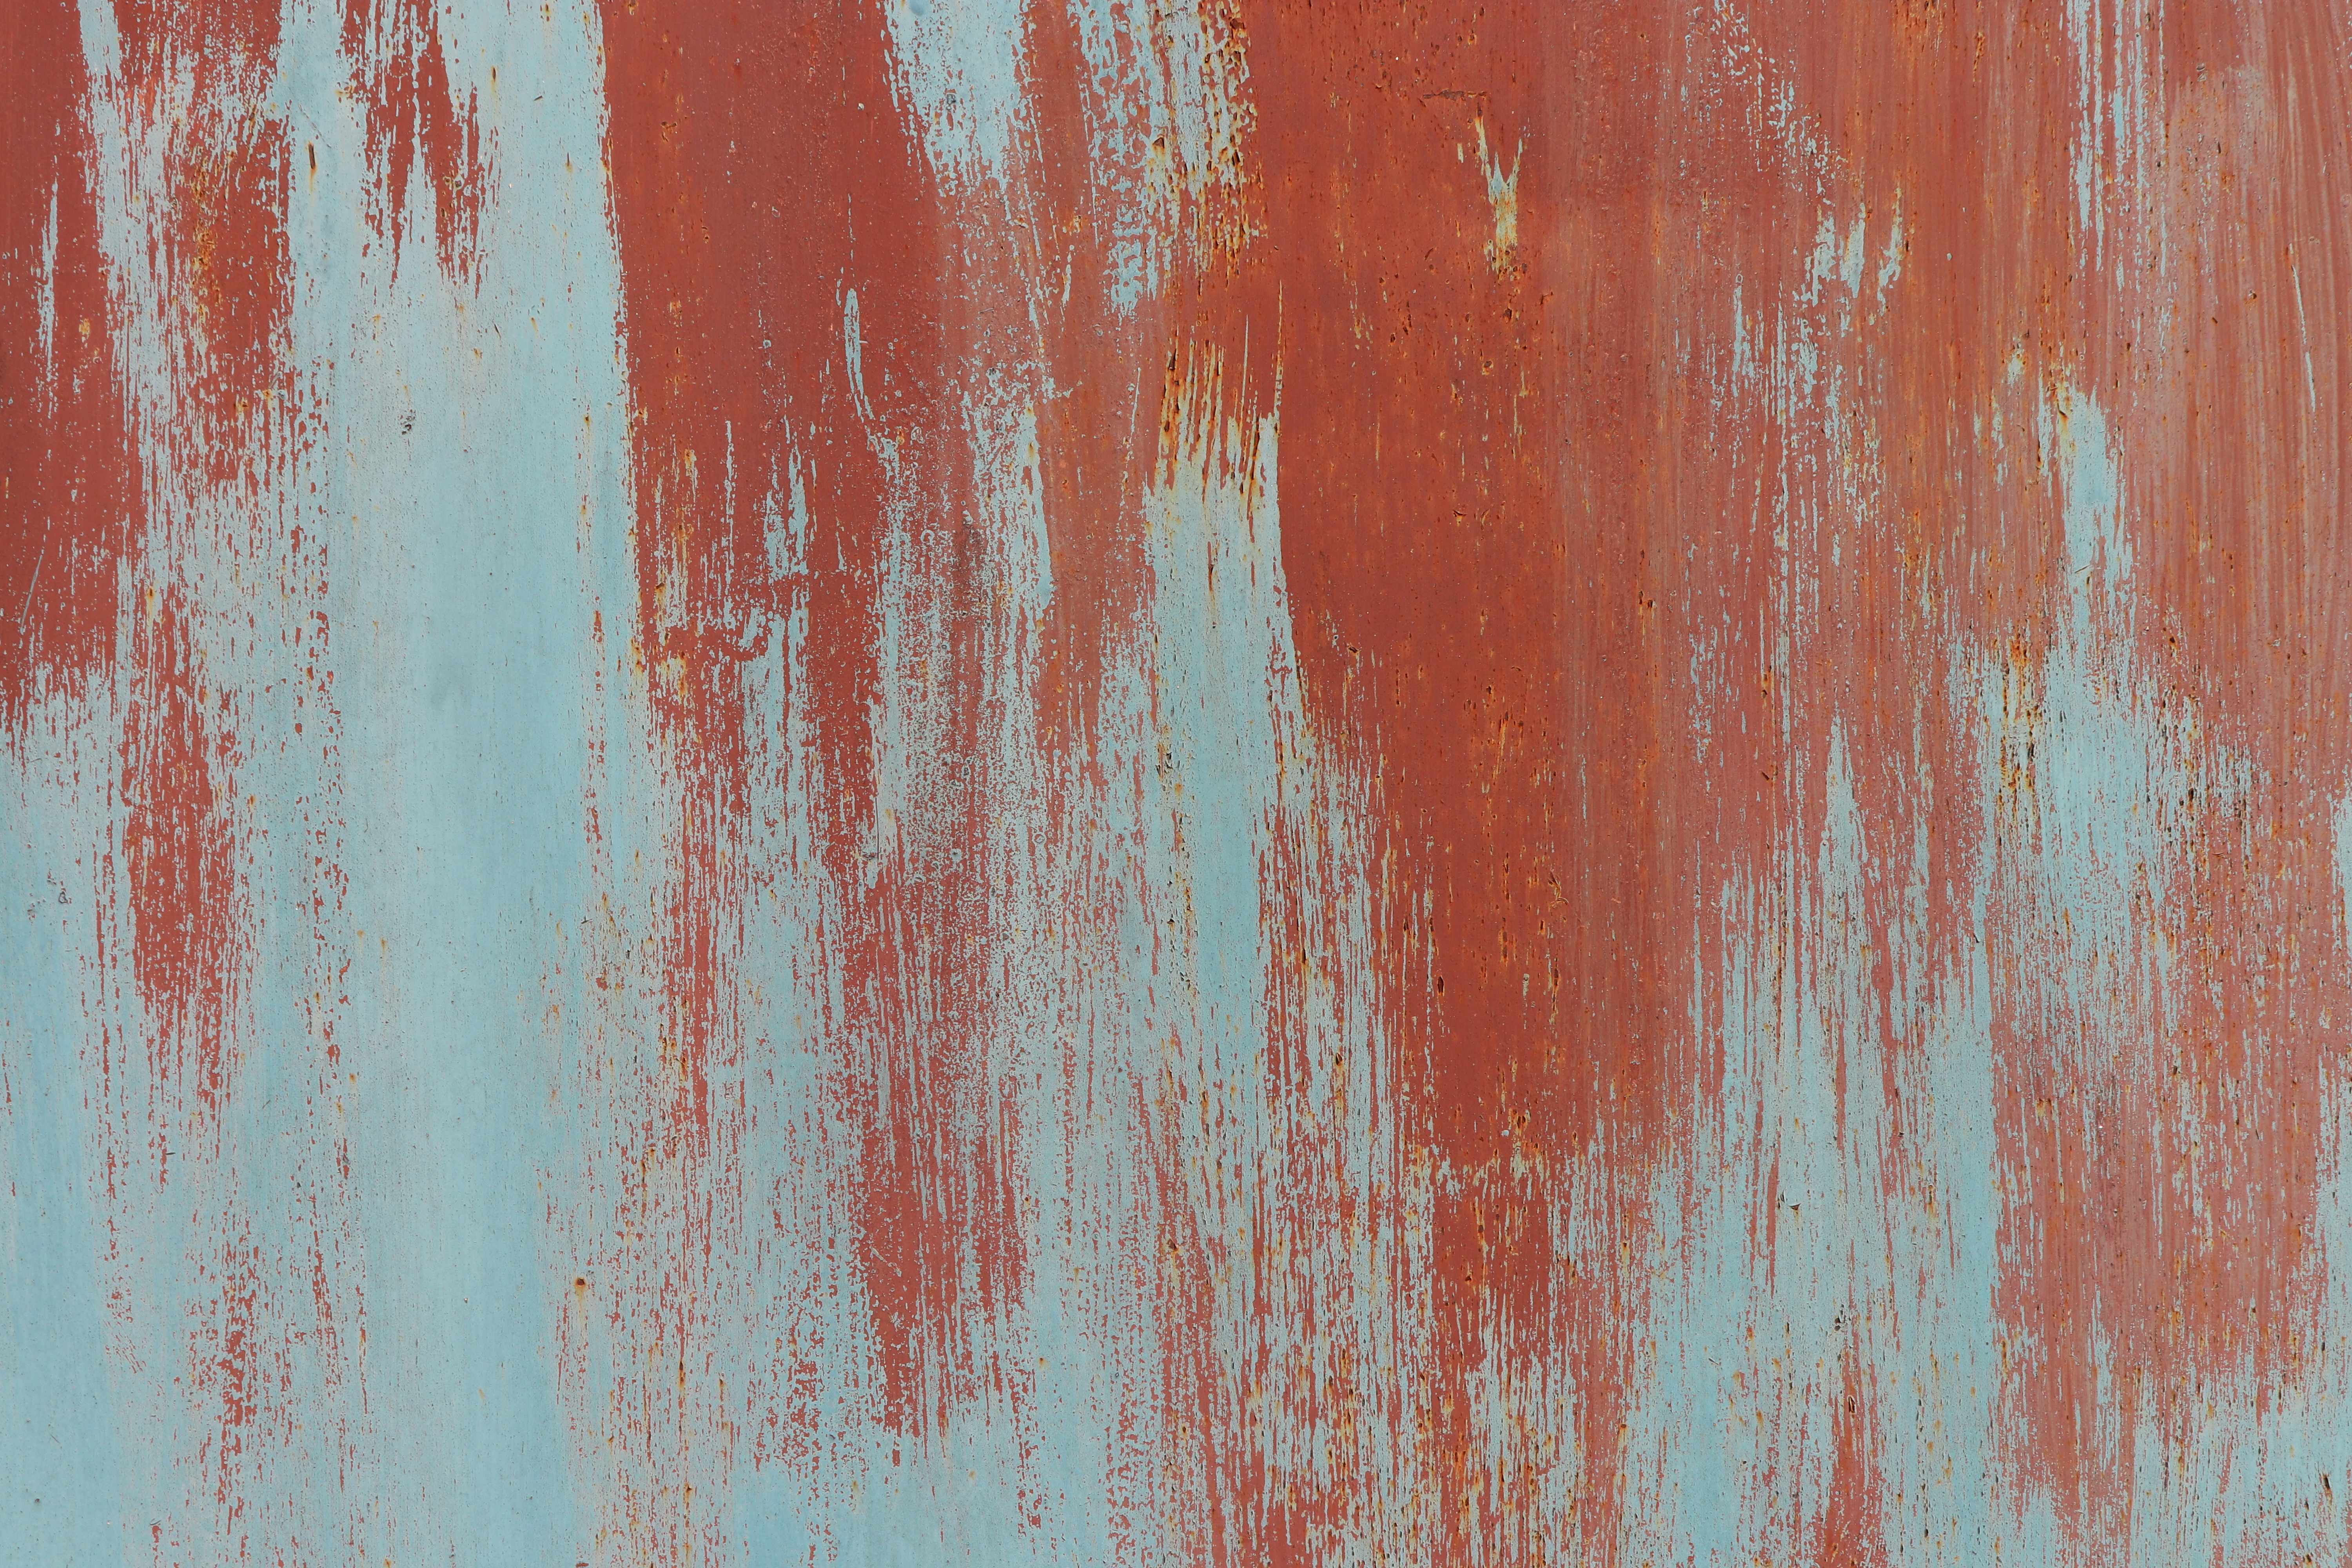 Old Weathered Blue Rust on Red Painted Wall Texture. Brush Strokes.